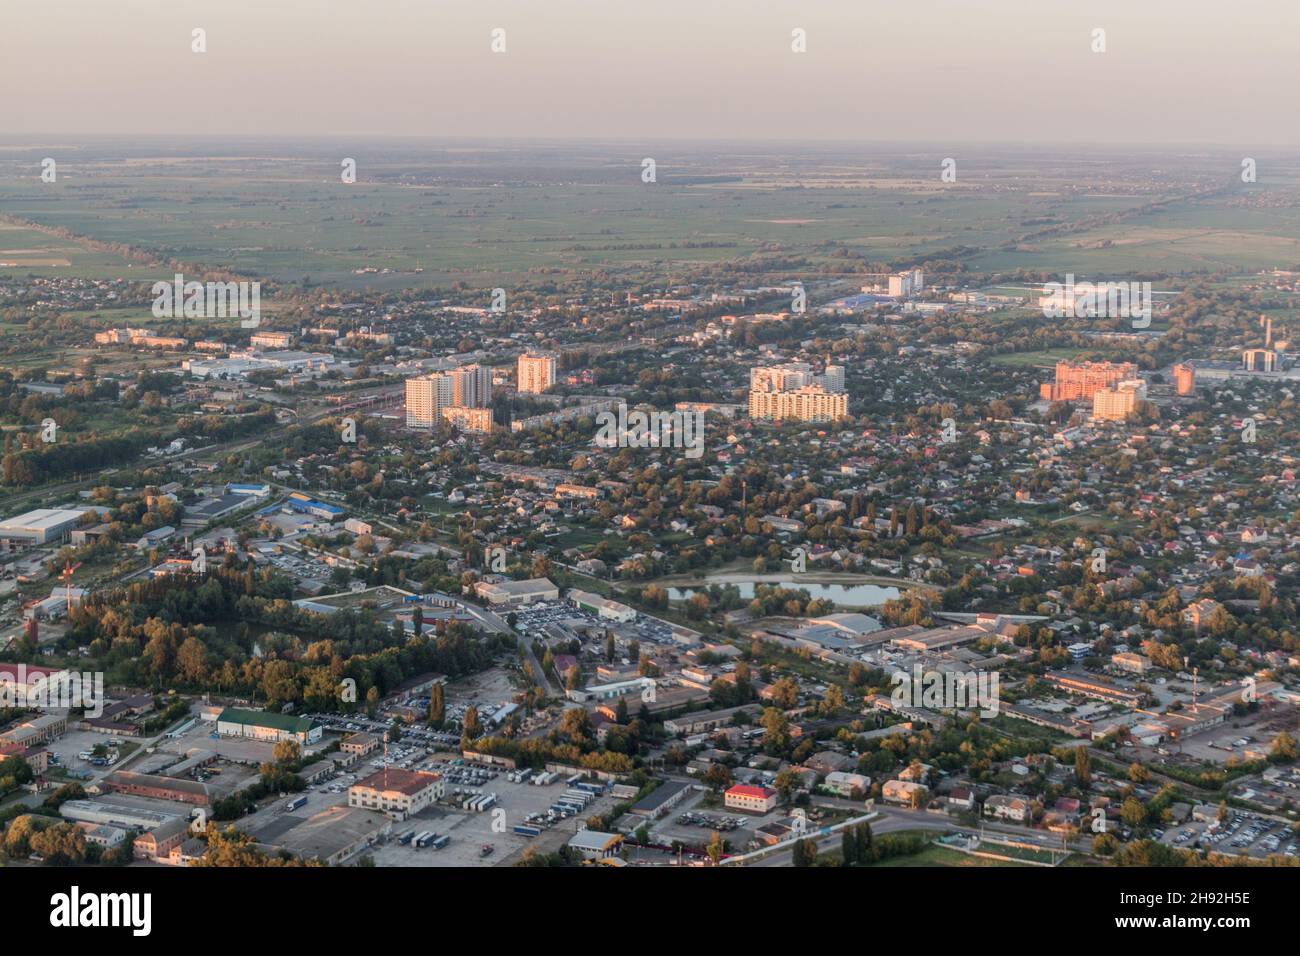 Aerial view of Boryspil town in Ukraine Stock Photo